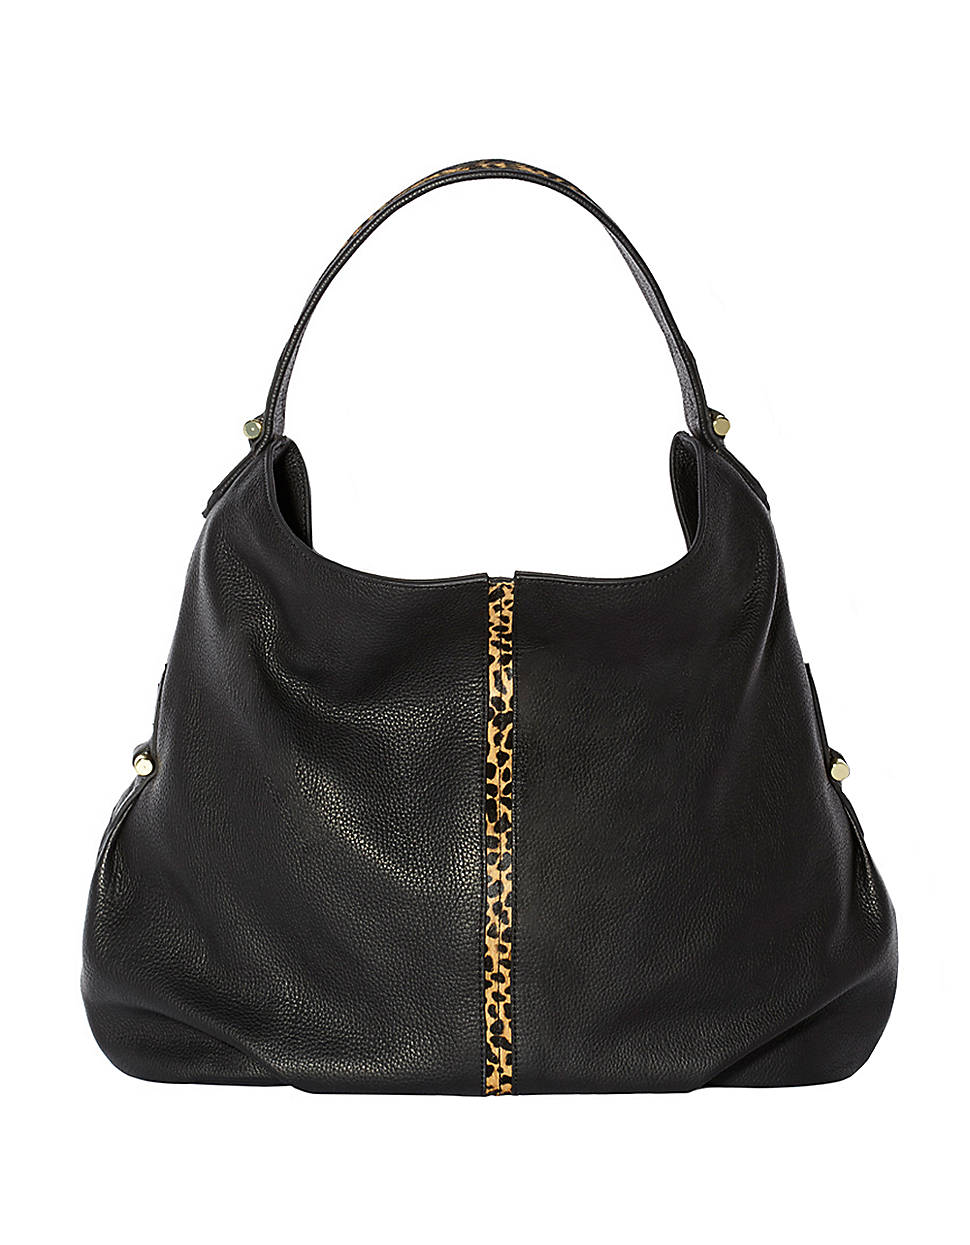 Vince Camuto Margo Leather Hobo Bag in Black | Lyst